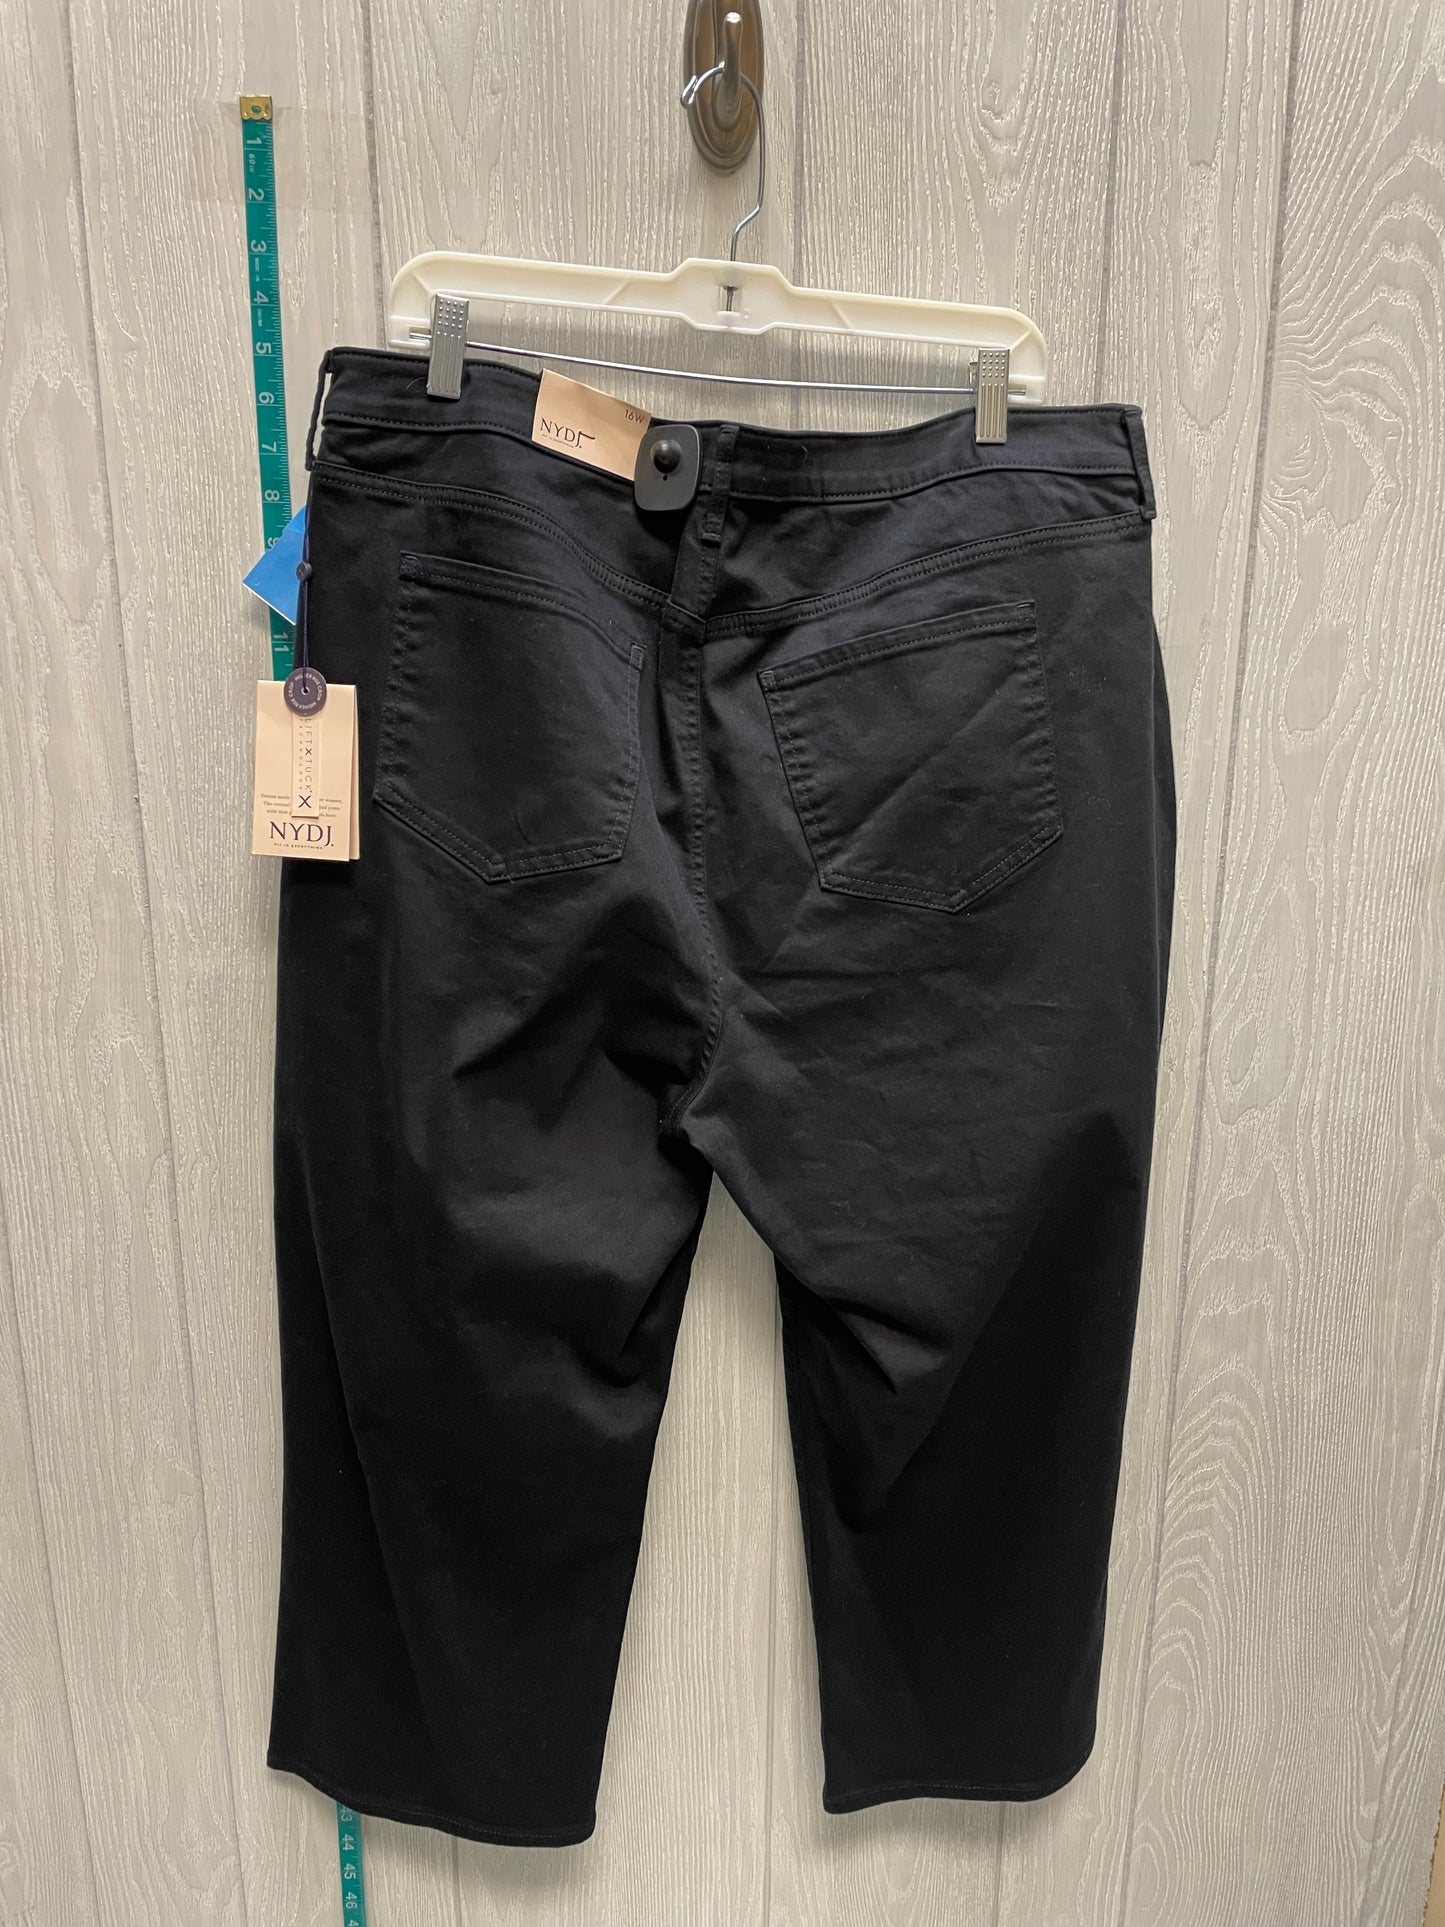 Black Denim Jeans Cropped Not Your Daughters Jeans O, Size 16